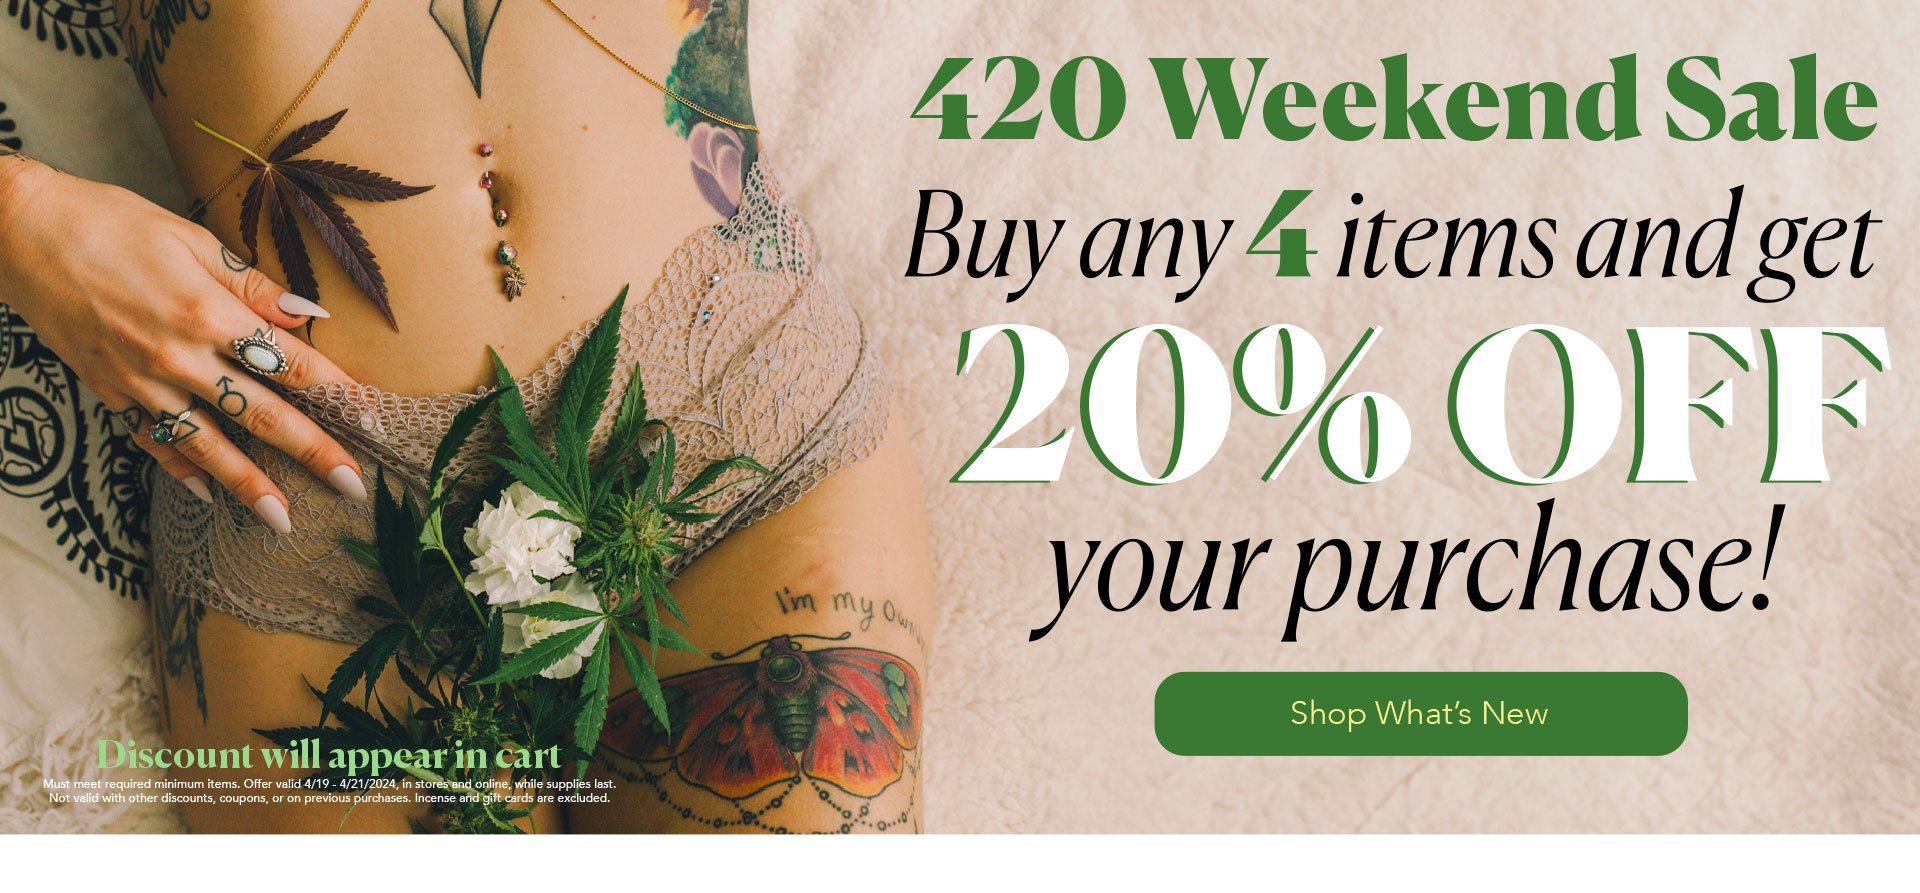 420 Weekend Sale - Buy any 4 items and get 20% OFF your purchase - shop What's New